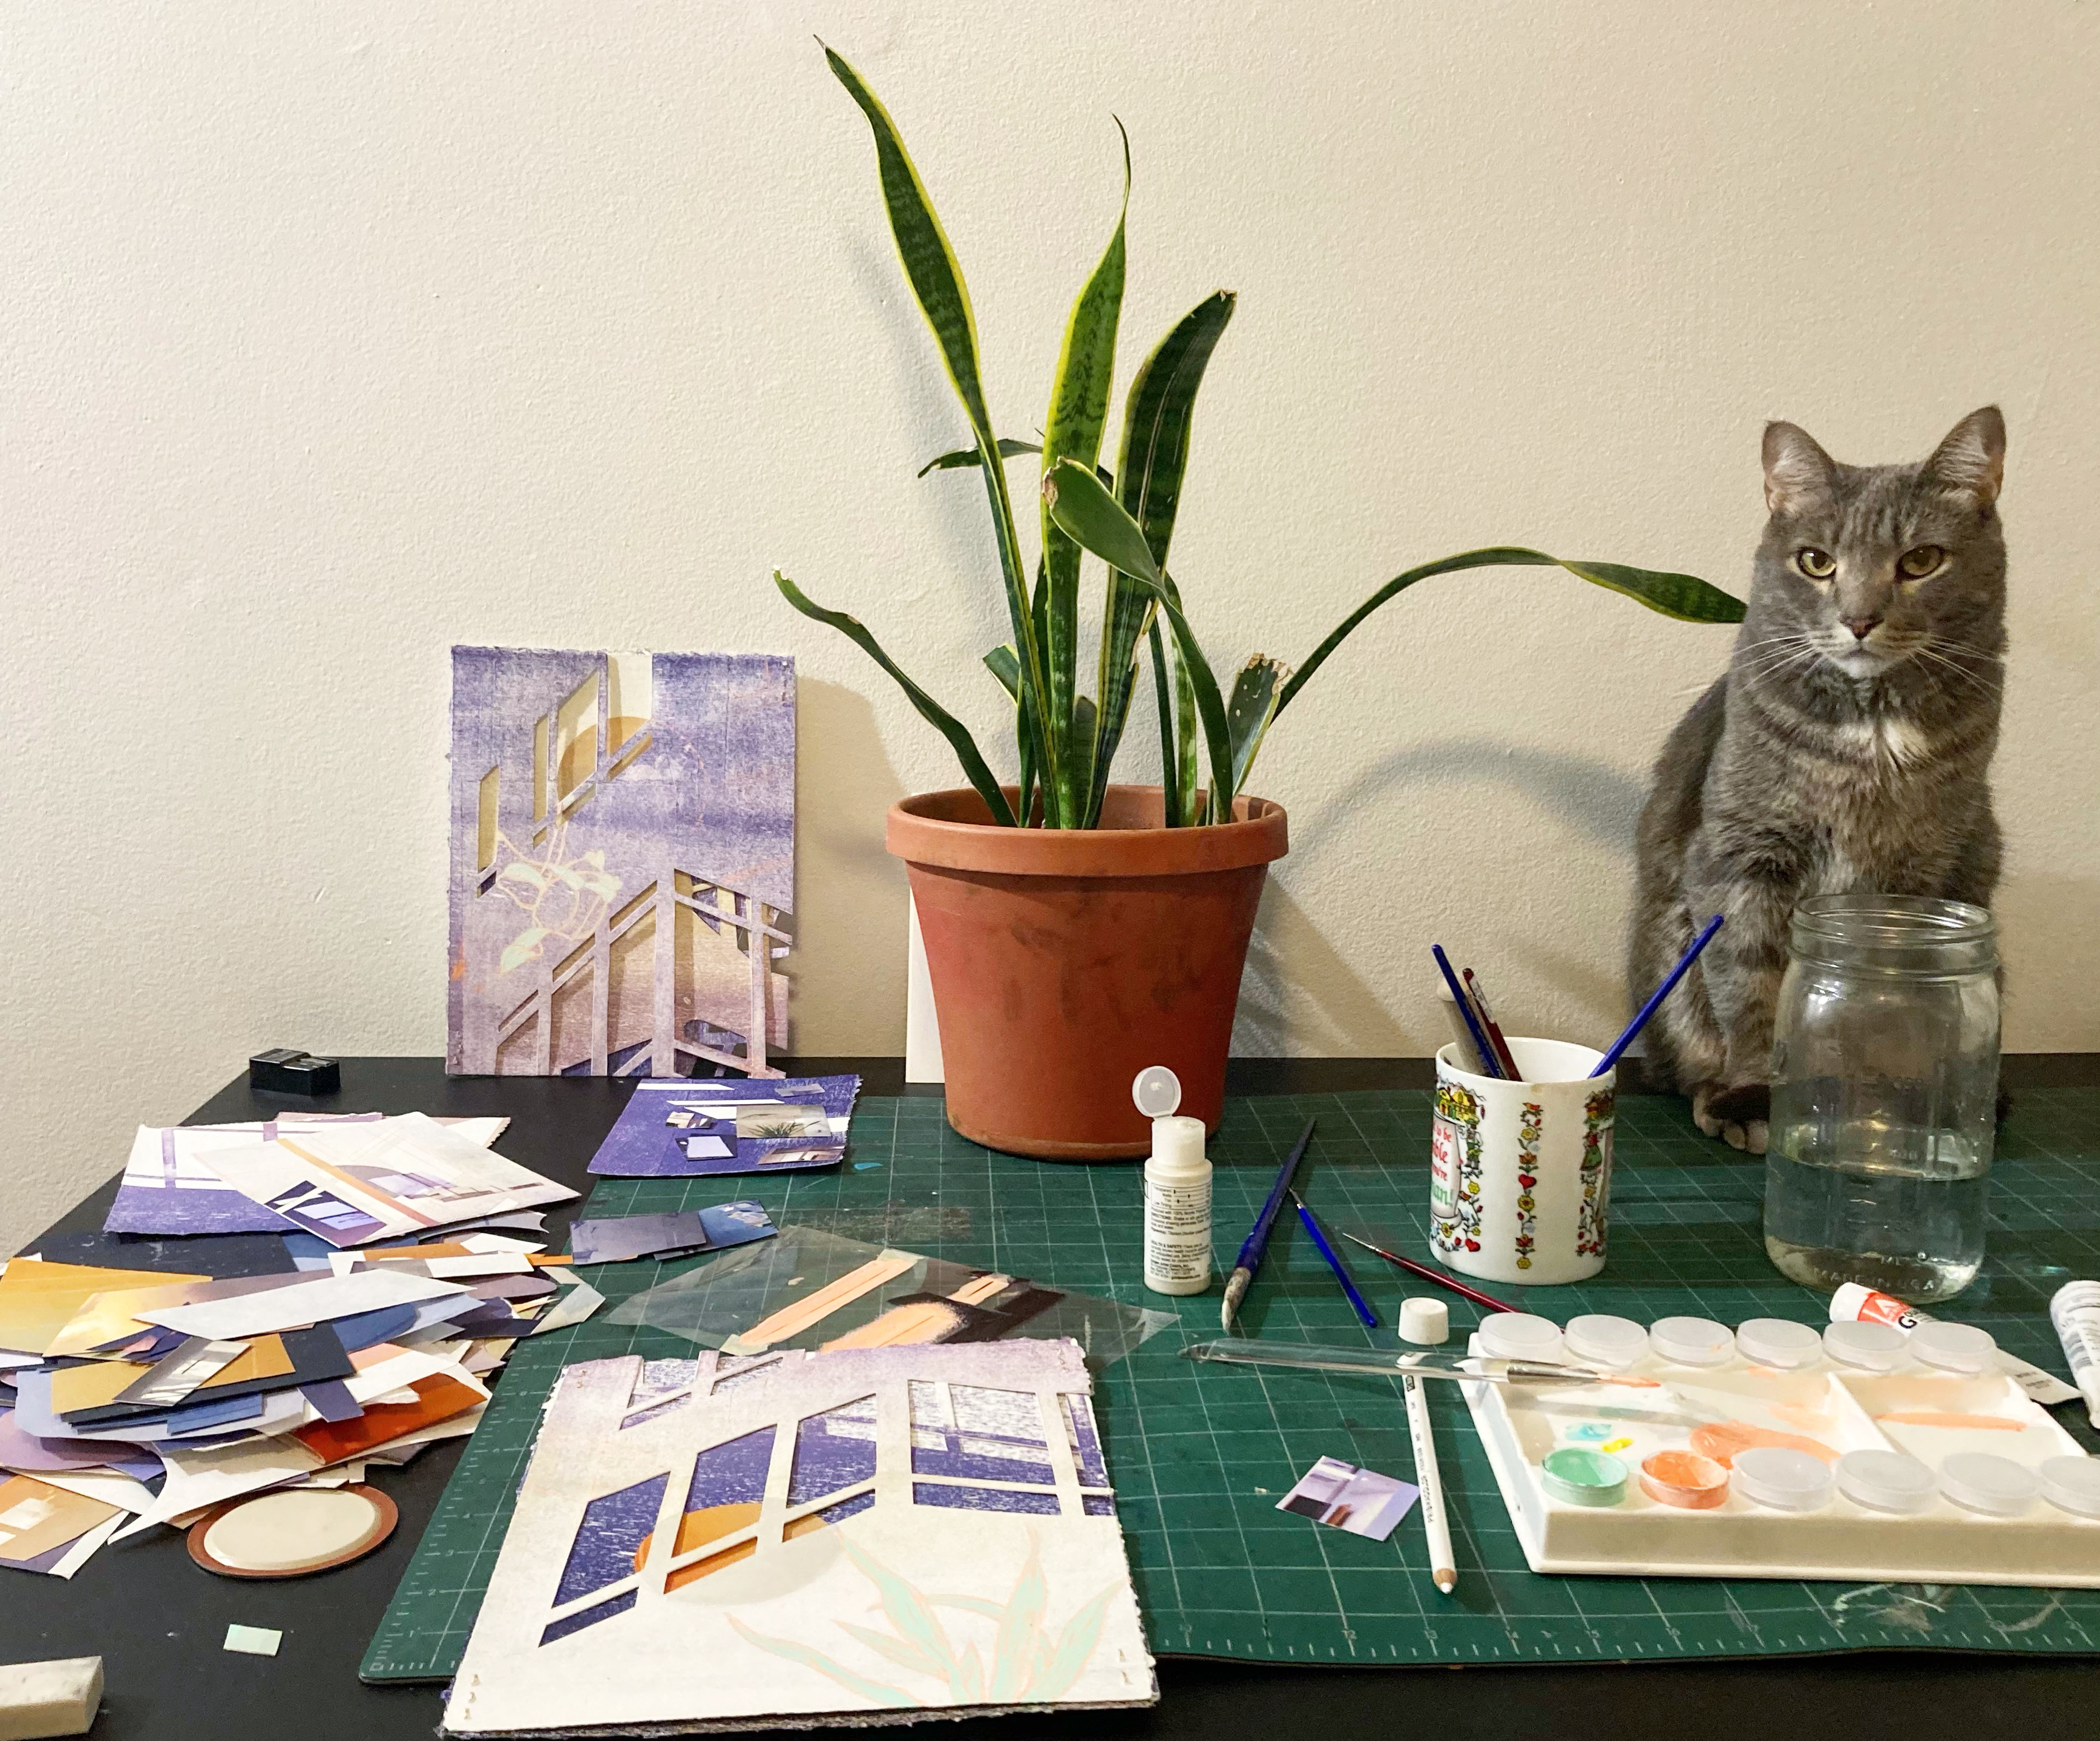 Work table with collage images, paper, paint, and other art supplies. A cat sits at the edge of the art space looking at the camera. 